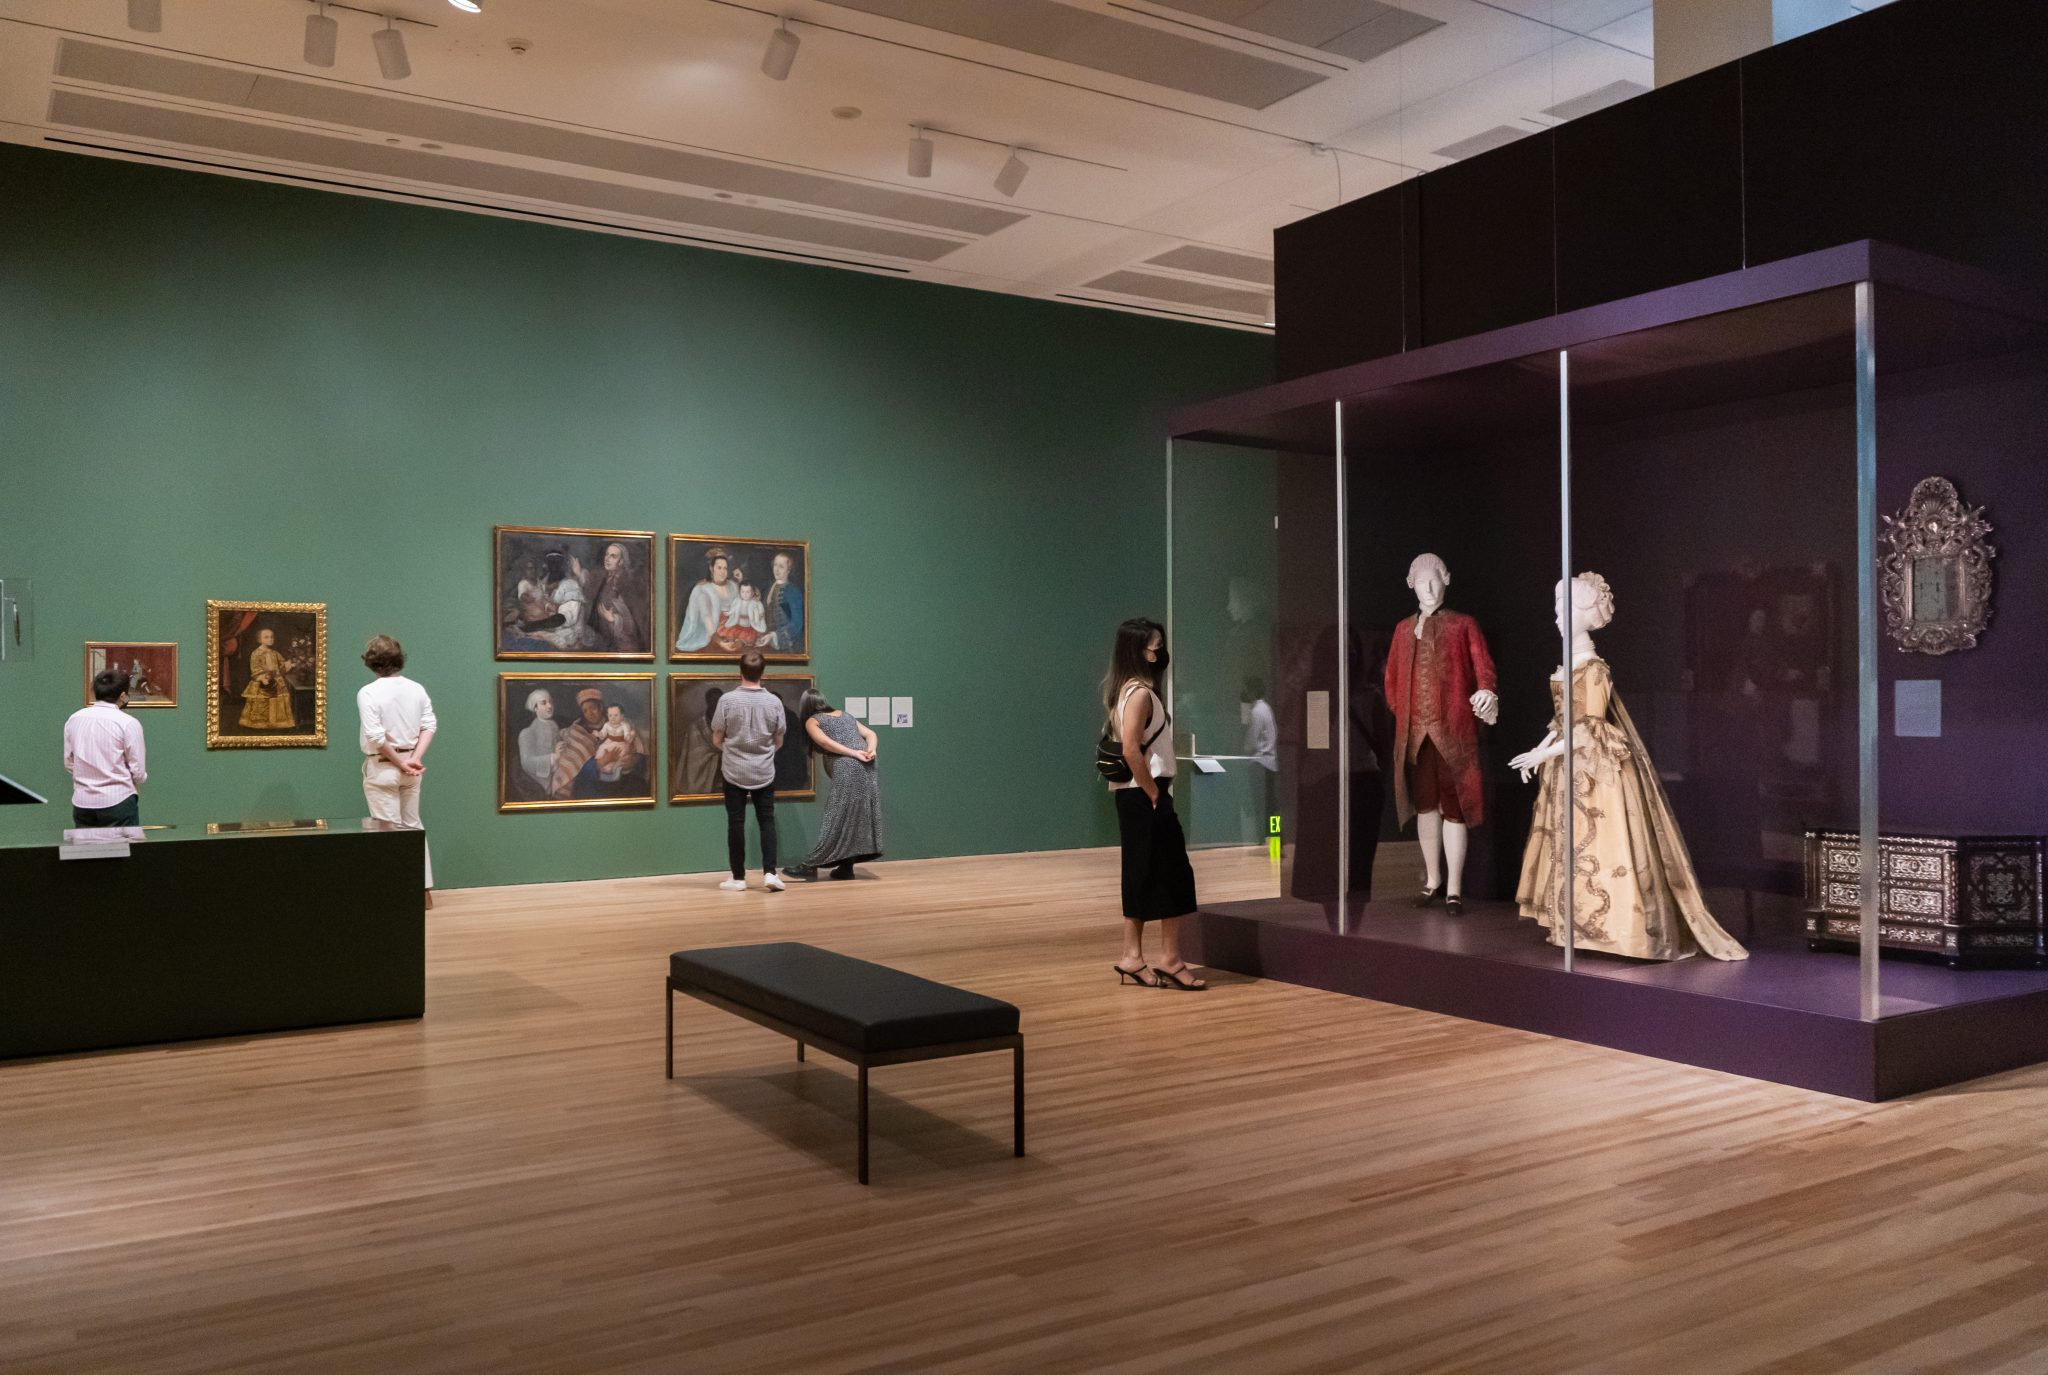 An installation view of an exhibition featuring paintings on a wall and two mannequins wearing 18th-century formalwear inside a glass enclosure.